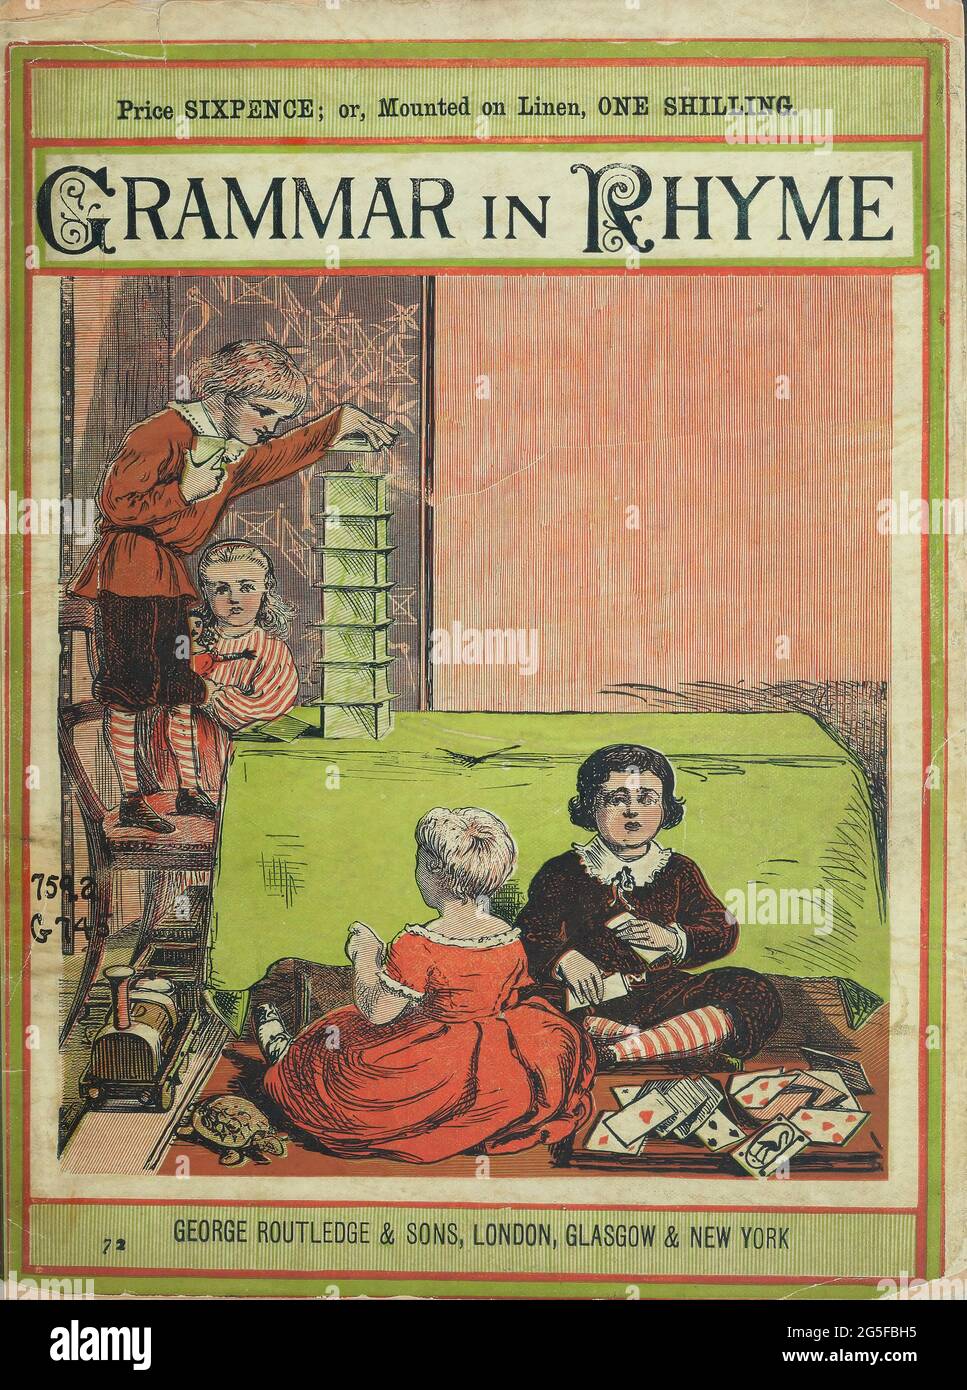 Grammar in rhyme by Walter Crane and Edmund Evans, Published in London, Glasgow & New York by George Routledge and Sons 1868 Stock Photo